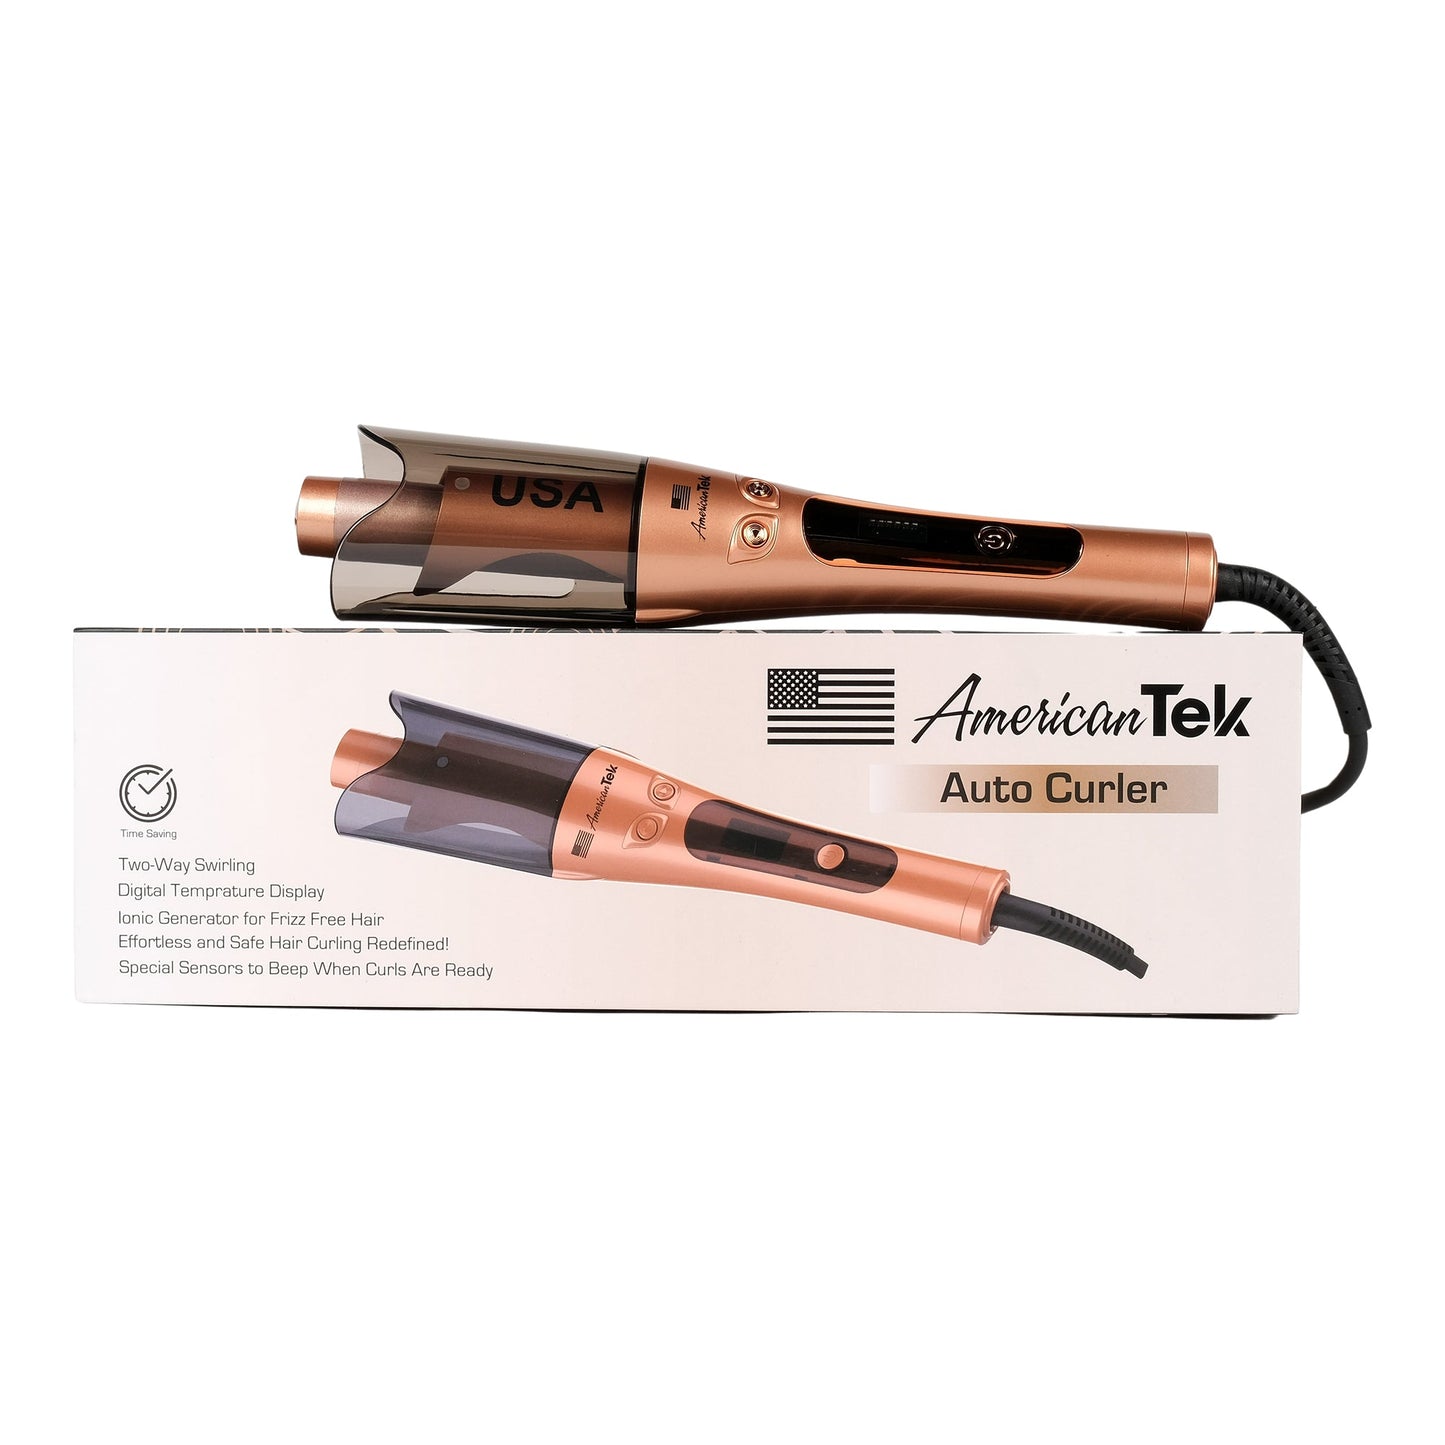 American Tek Automatic Curling Iron Wand- Auto Curler with 4 Temperatures & 3 Timers & LCD Display, Curling Iron with 1" Large Rotating Barrel, Auto Shut-Off Spin Iron for Hair Styling - Gold - Couture Hair Pro